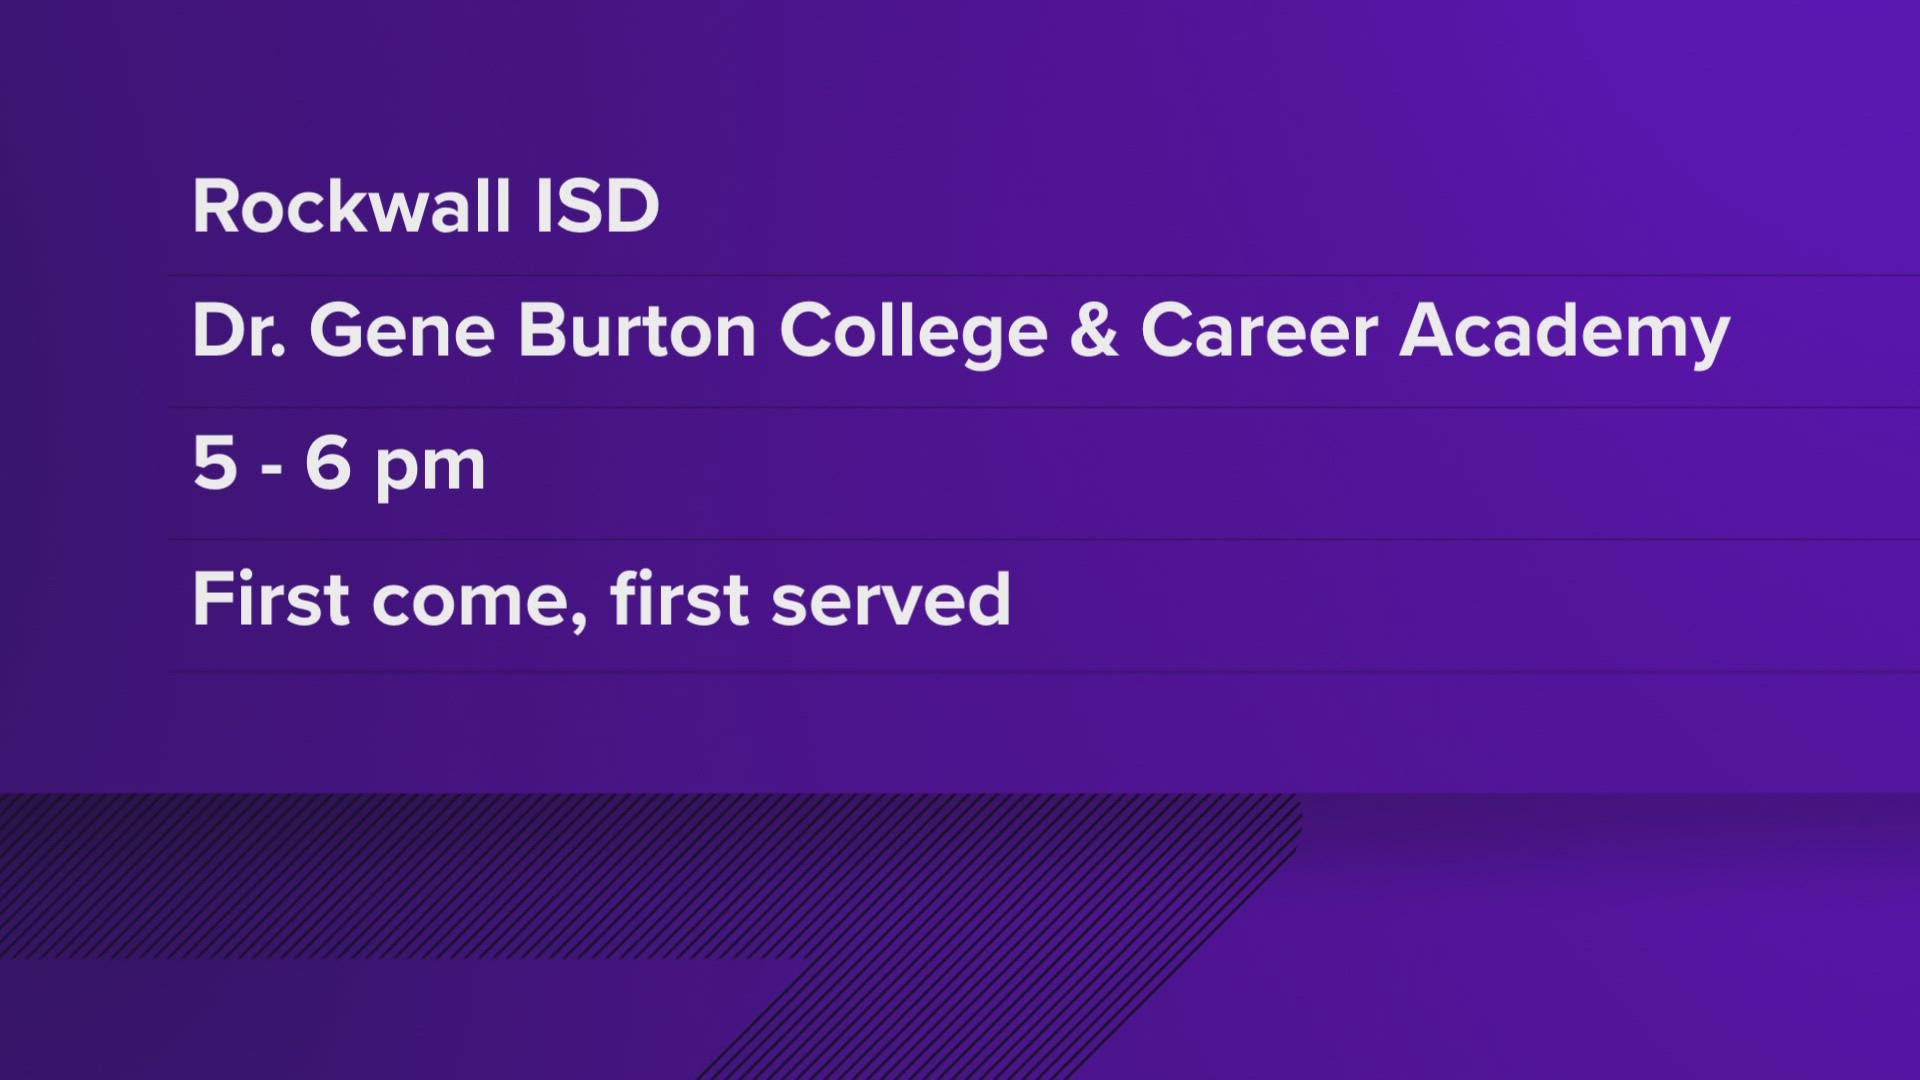 The event will start at 5 p.m. in Rockwall ISD.